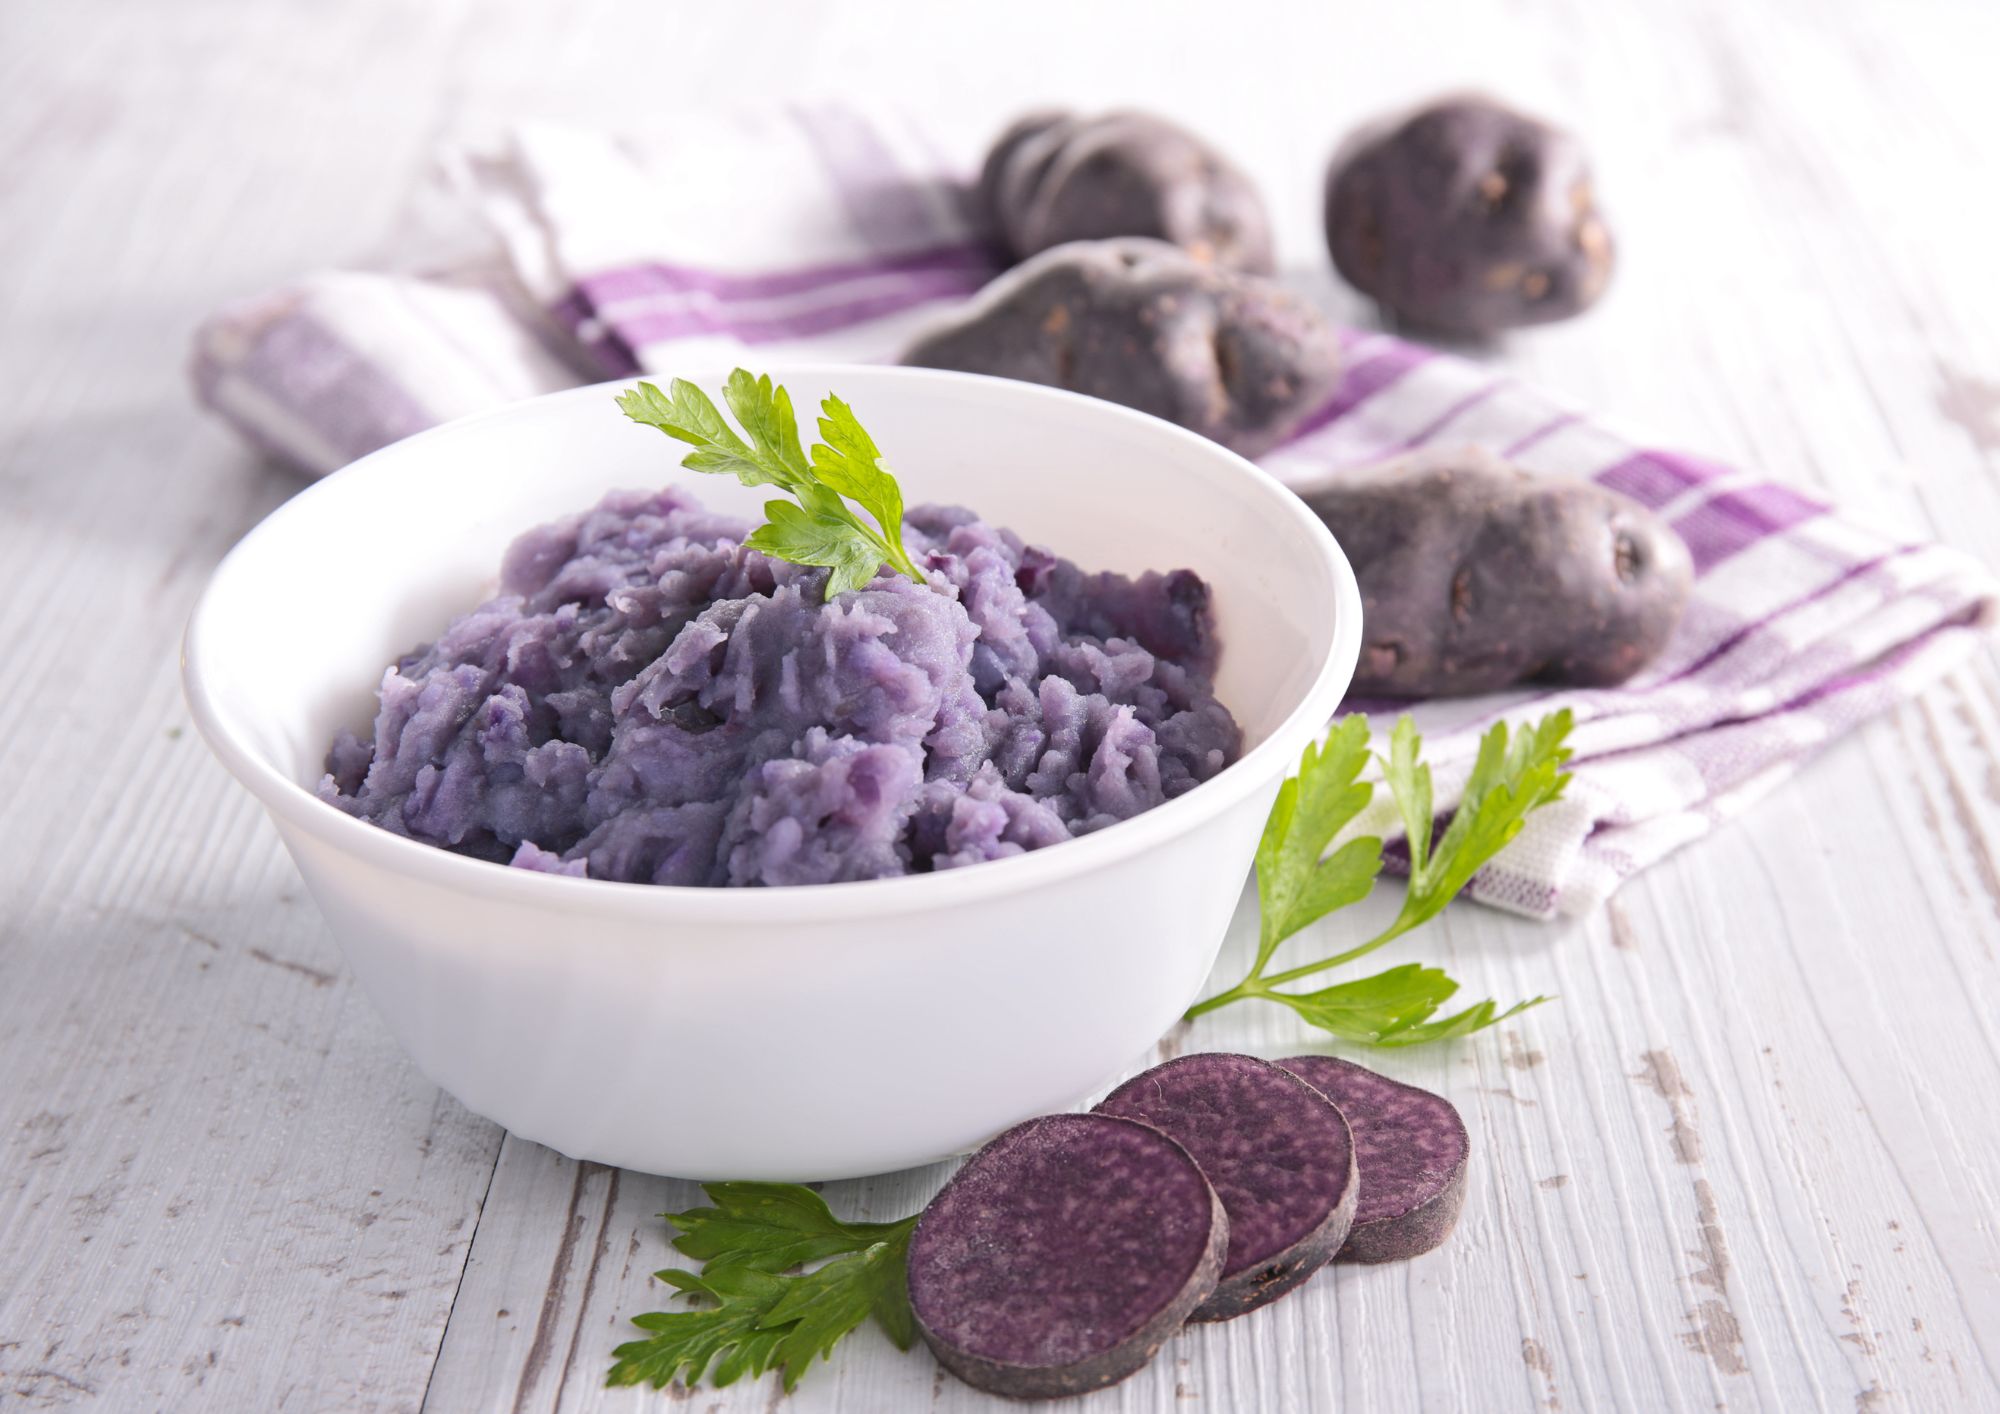 Cold Violet Queen mashed potato 